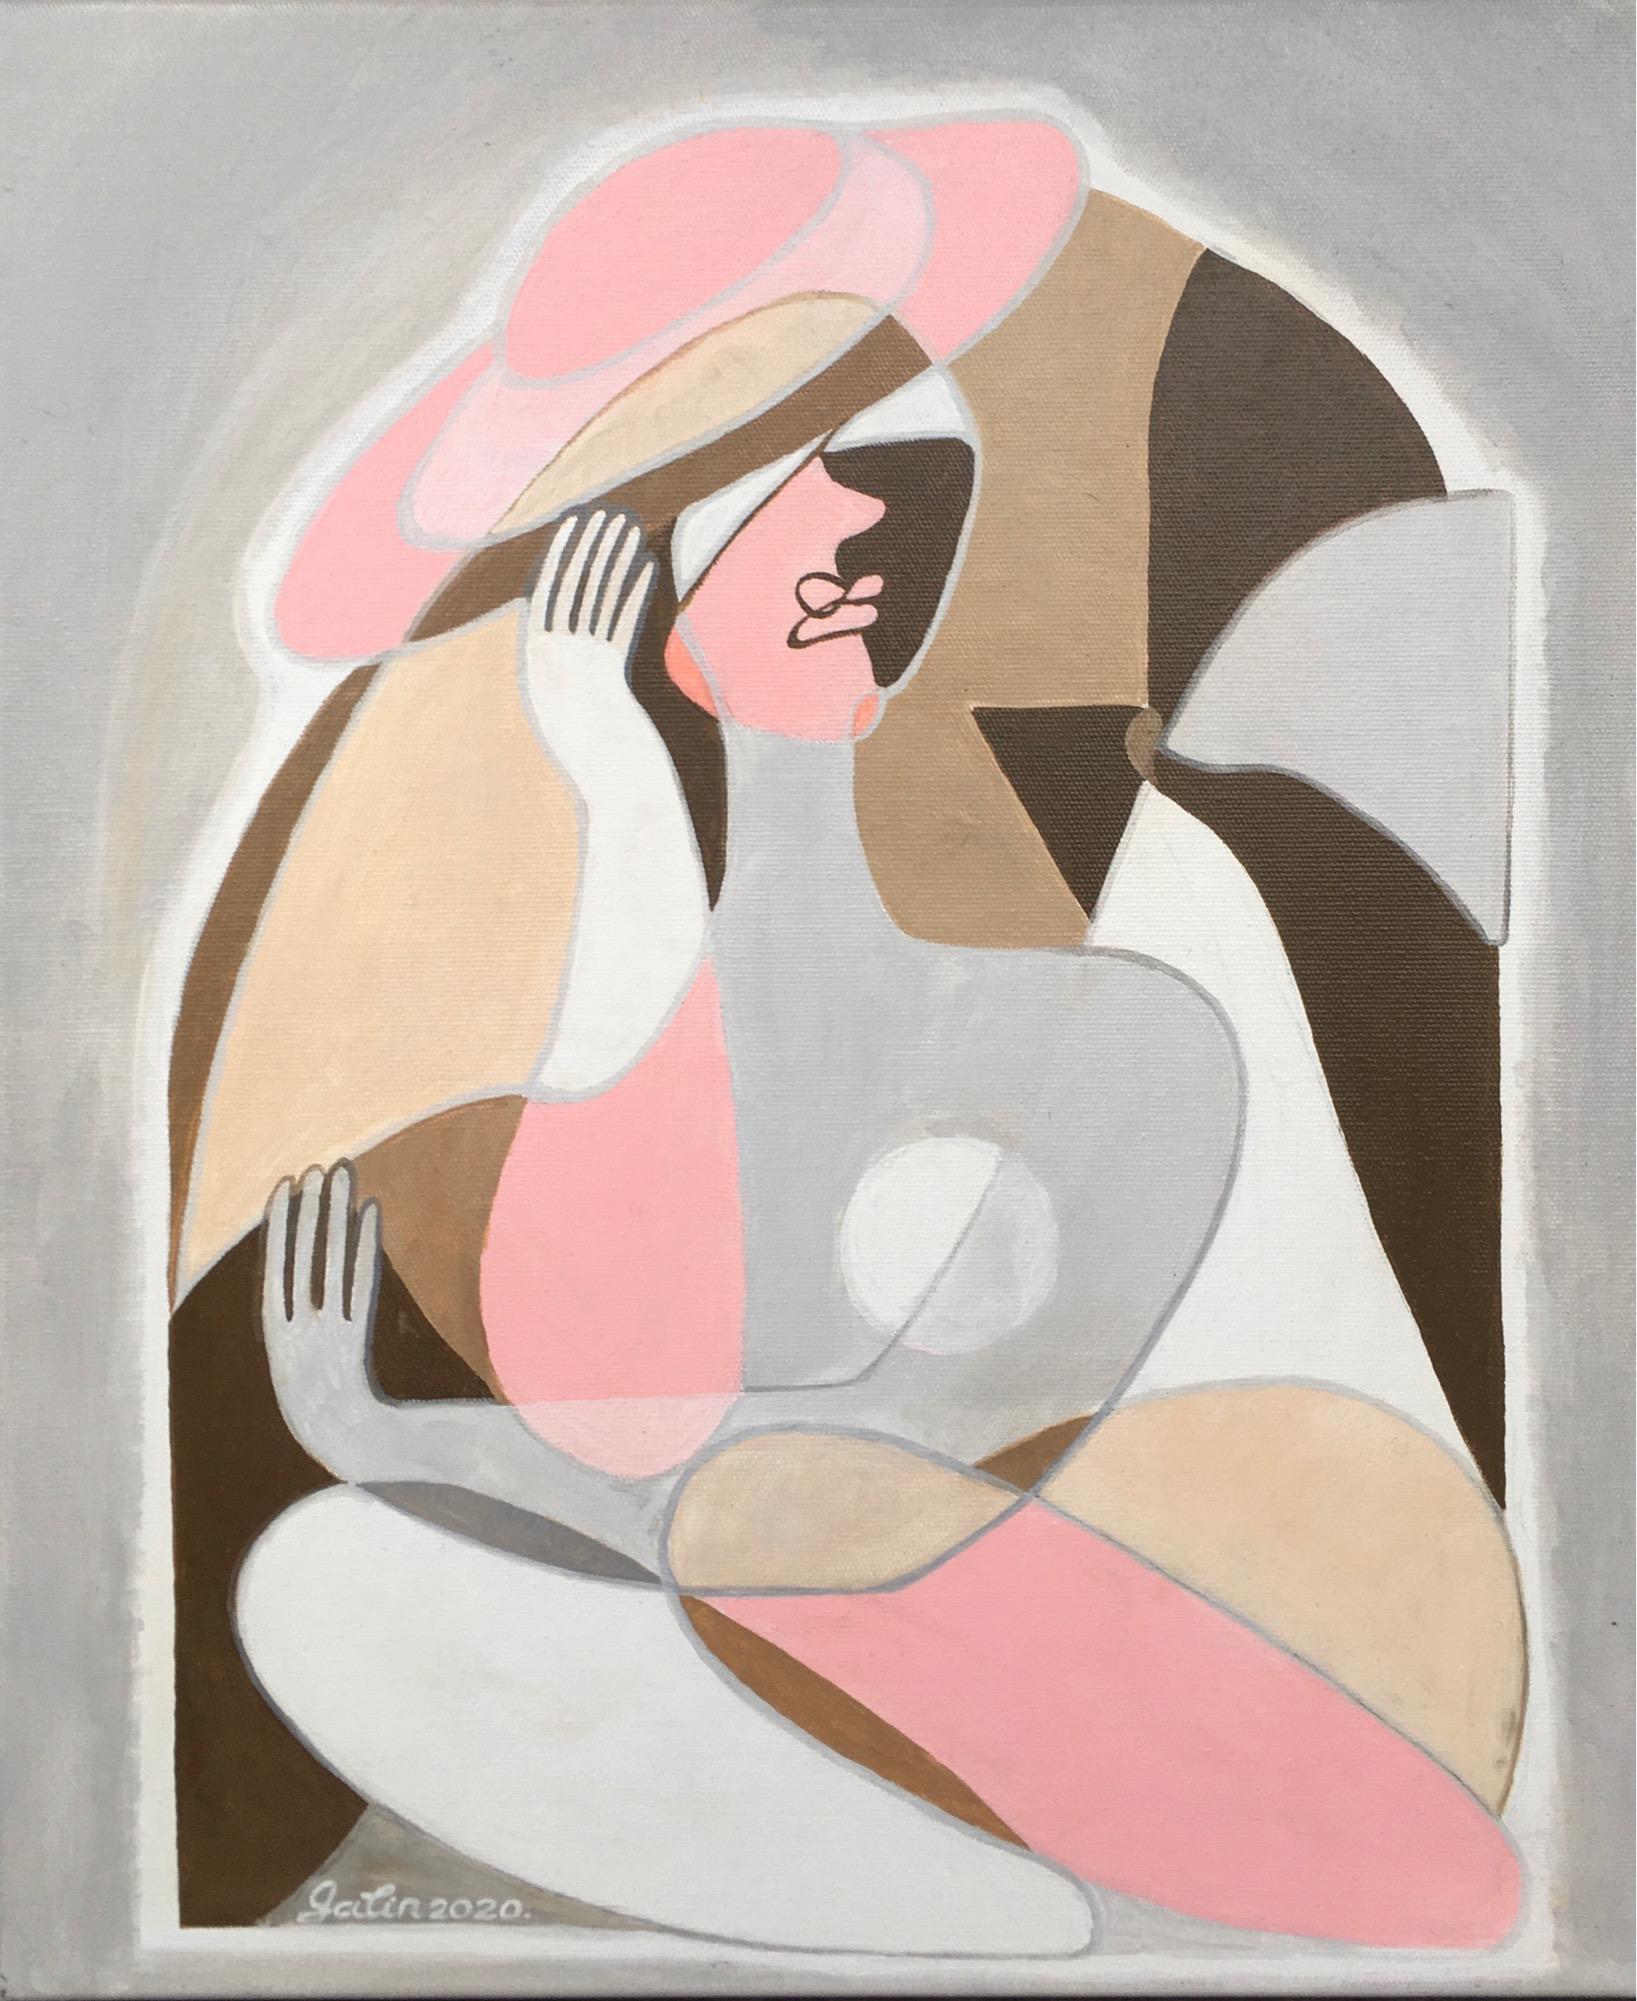 The dreaming lady- abstraction art, made in pale pink, beige, grey, brown color